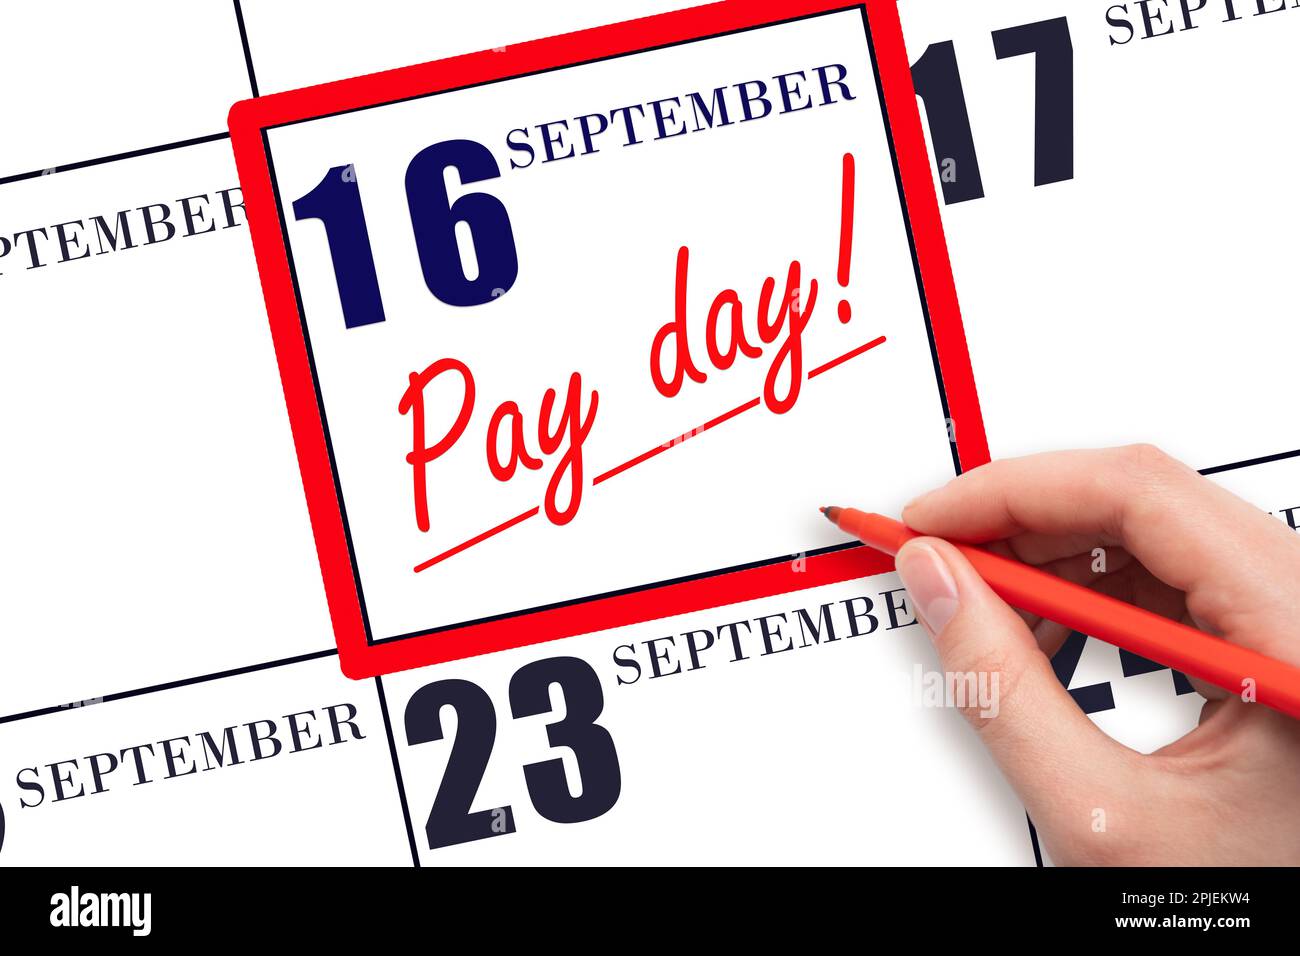 16th day of September. Hand writing text PAY DATE on calendar date September 16 and underline it. Payment due date. Reminder concept of payment. Autum Stock Photo